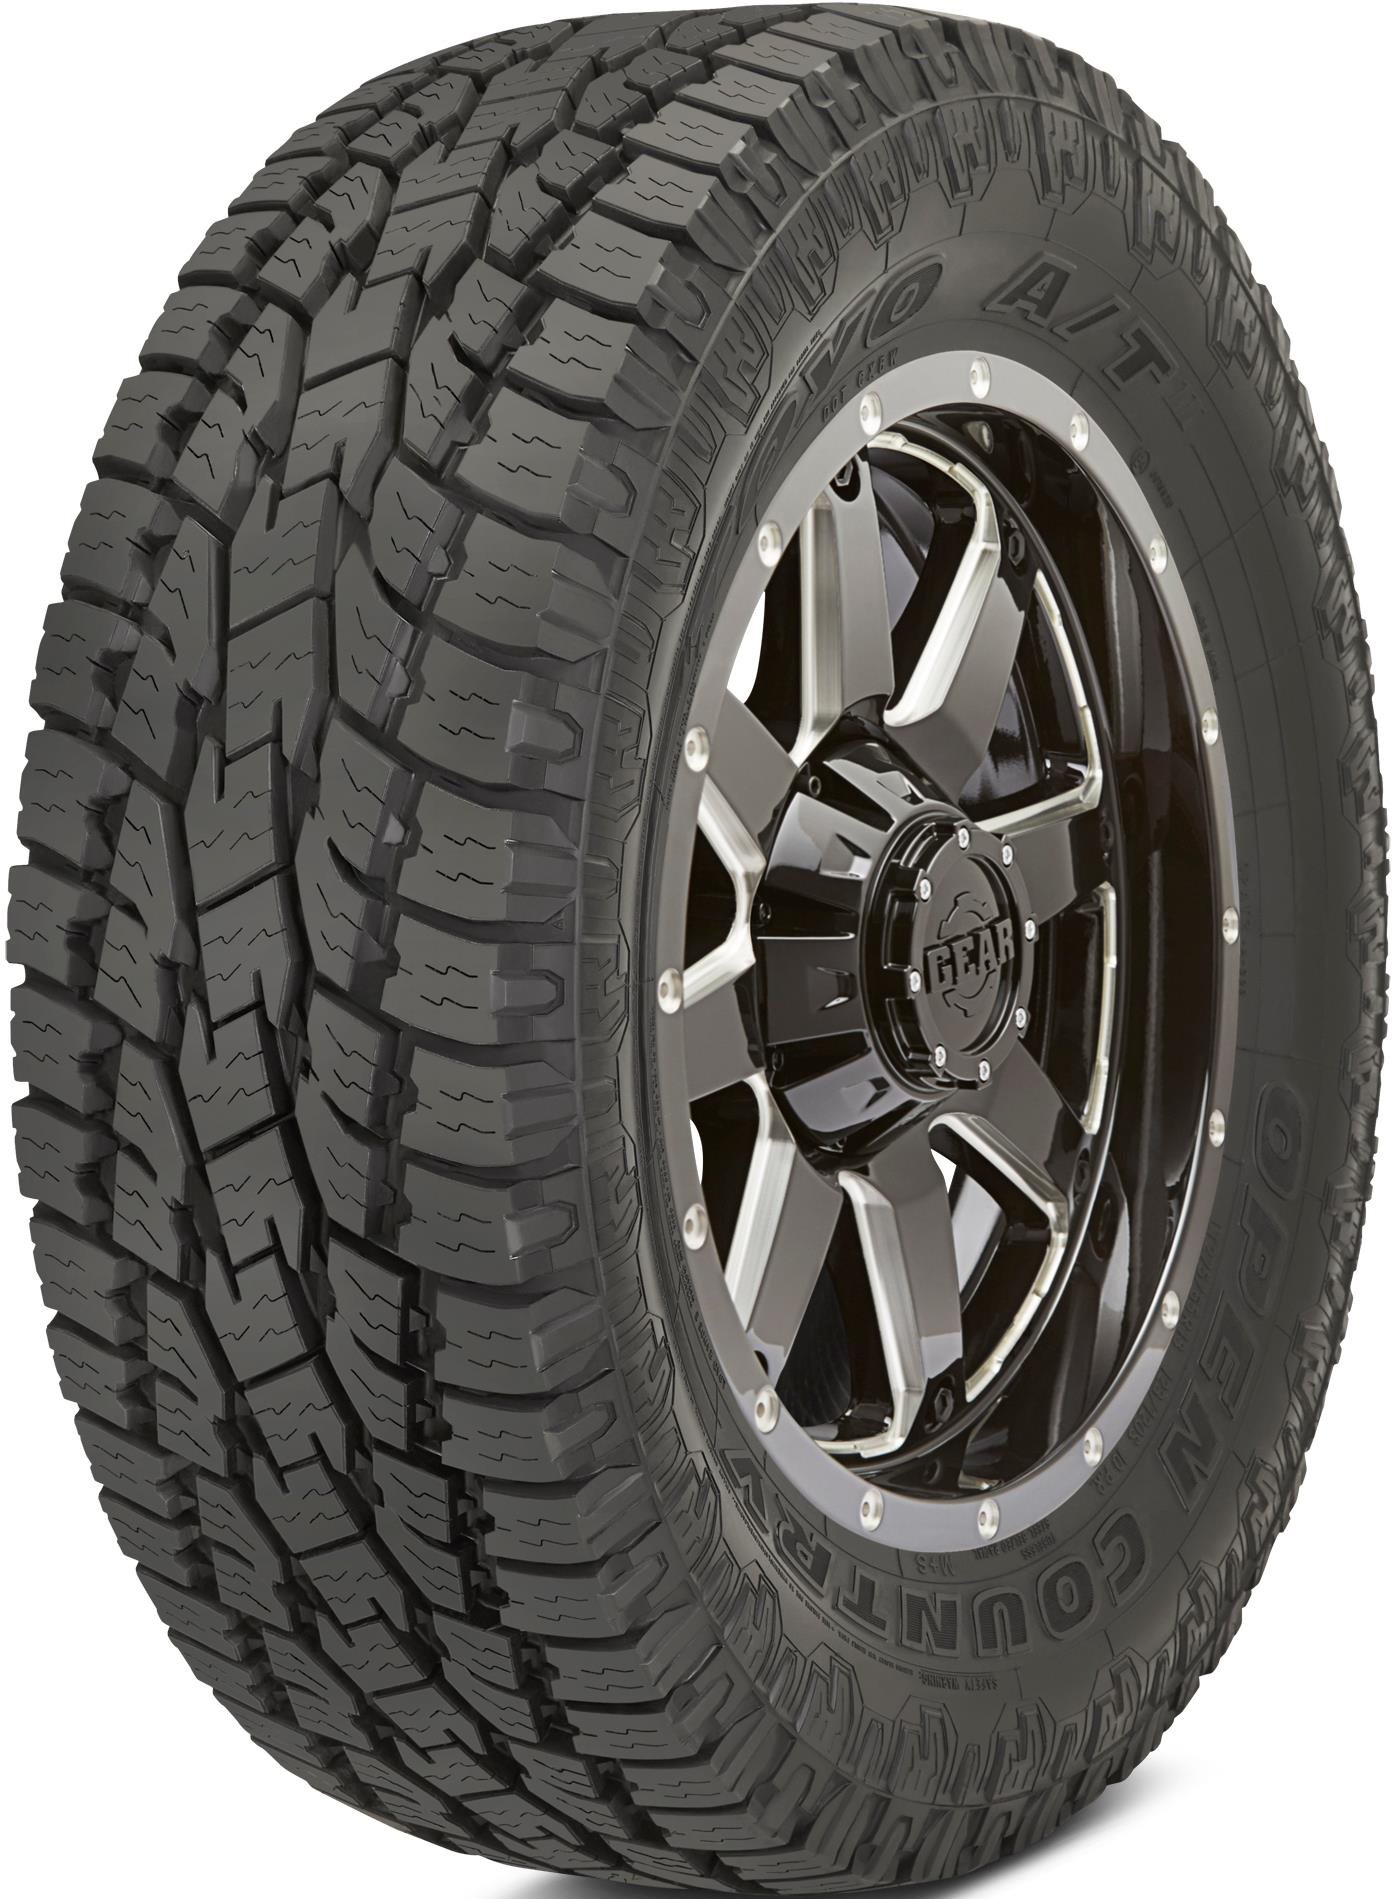 TOYO OPEN COUNTRY A/T+ 215/60 R 17 96V.